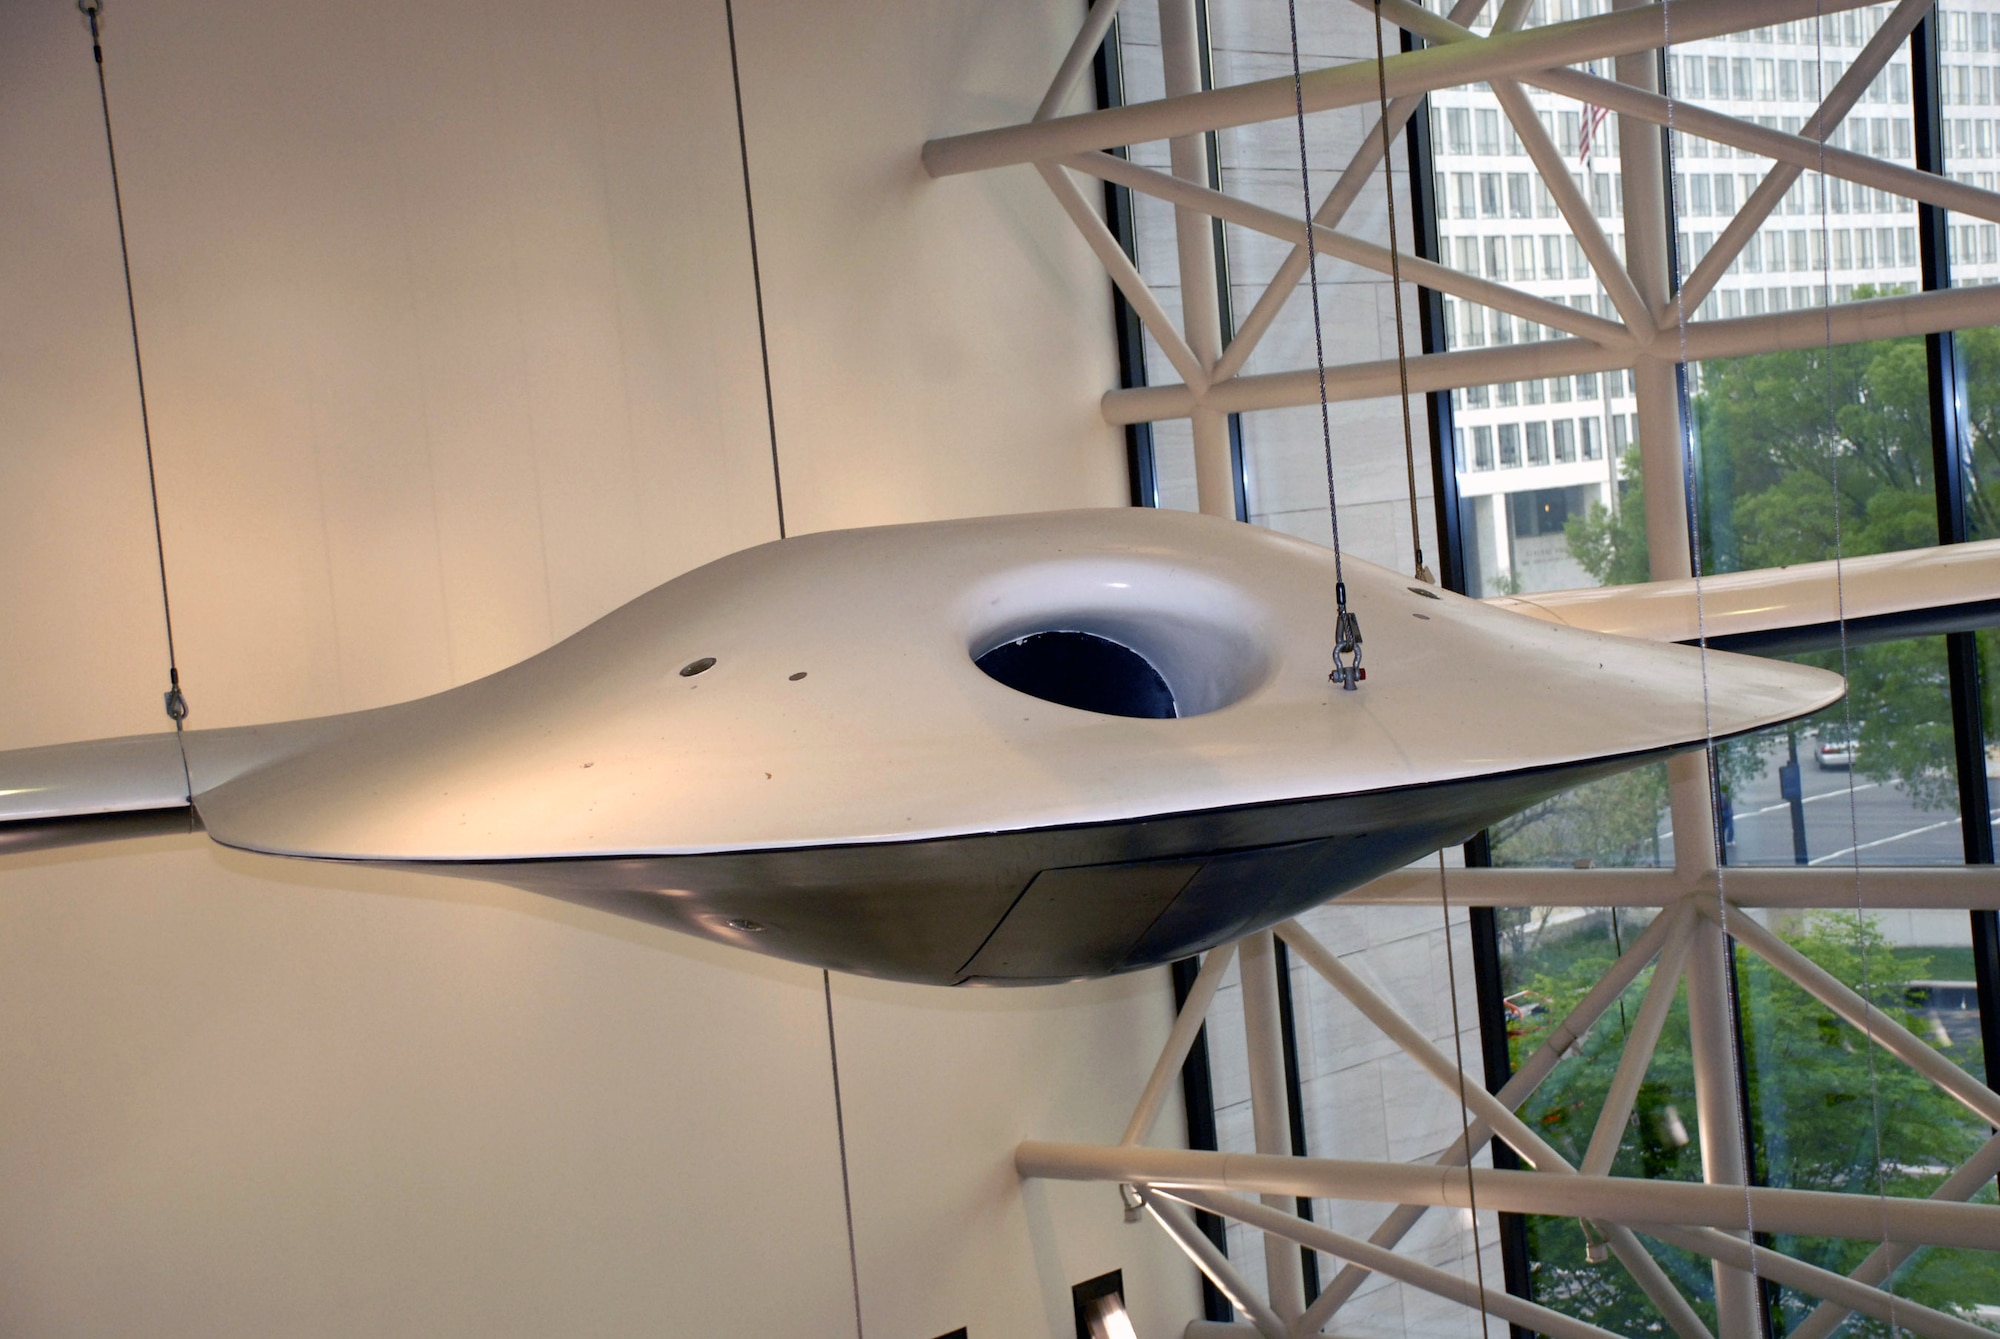 An RQ-3A Darkstar hangs in the Smithsonian Institution's National Air and Space Museum in a new exhibit of military unmanned aerial vehicles. The exhibit, which opened to the public April 24, includes six UAVs from all four services and will be on display for the next 10 years. The Darkstar integrated stealth technology into a UAV, but the project was soon abandoned. (U.S. Air Force photo/Staff Sgt. J.G. Buzanowski) 